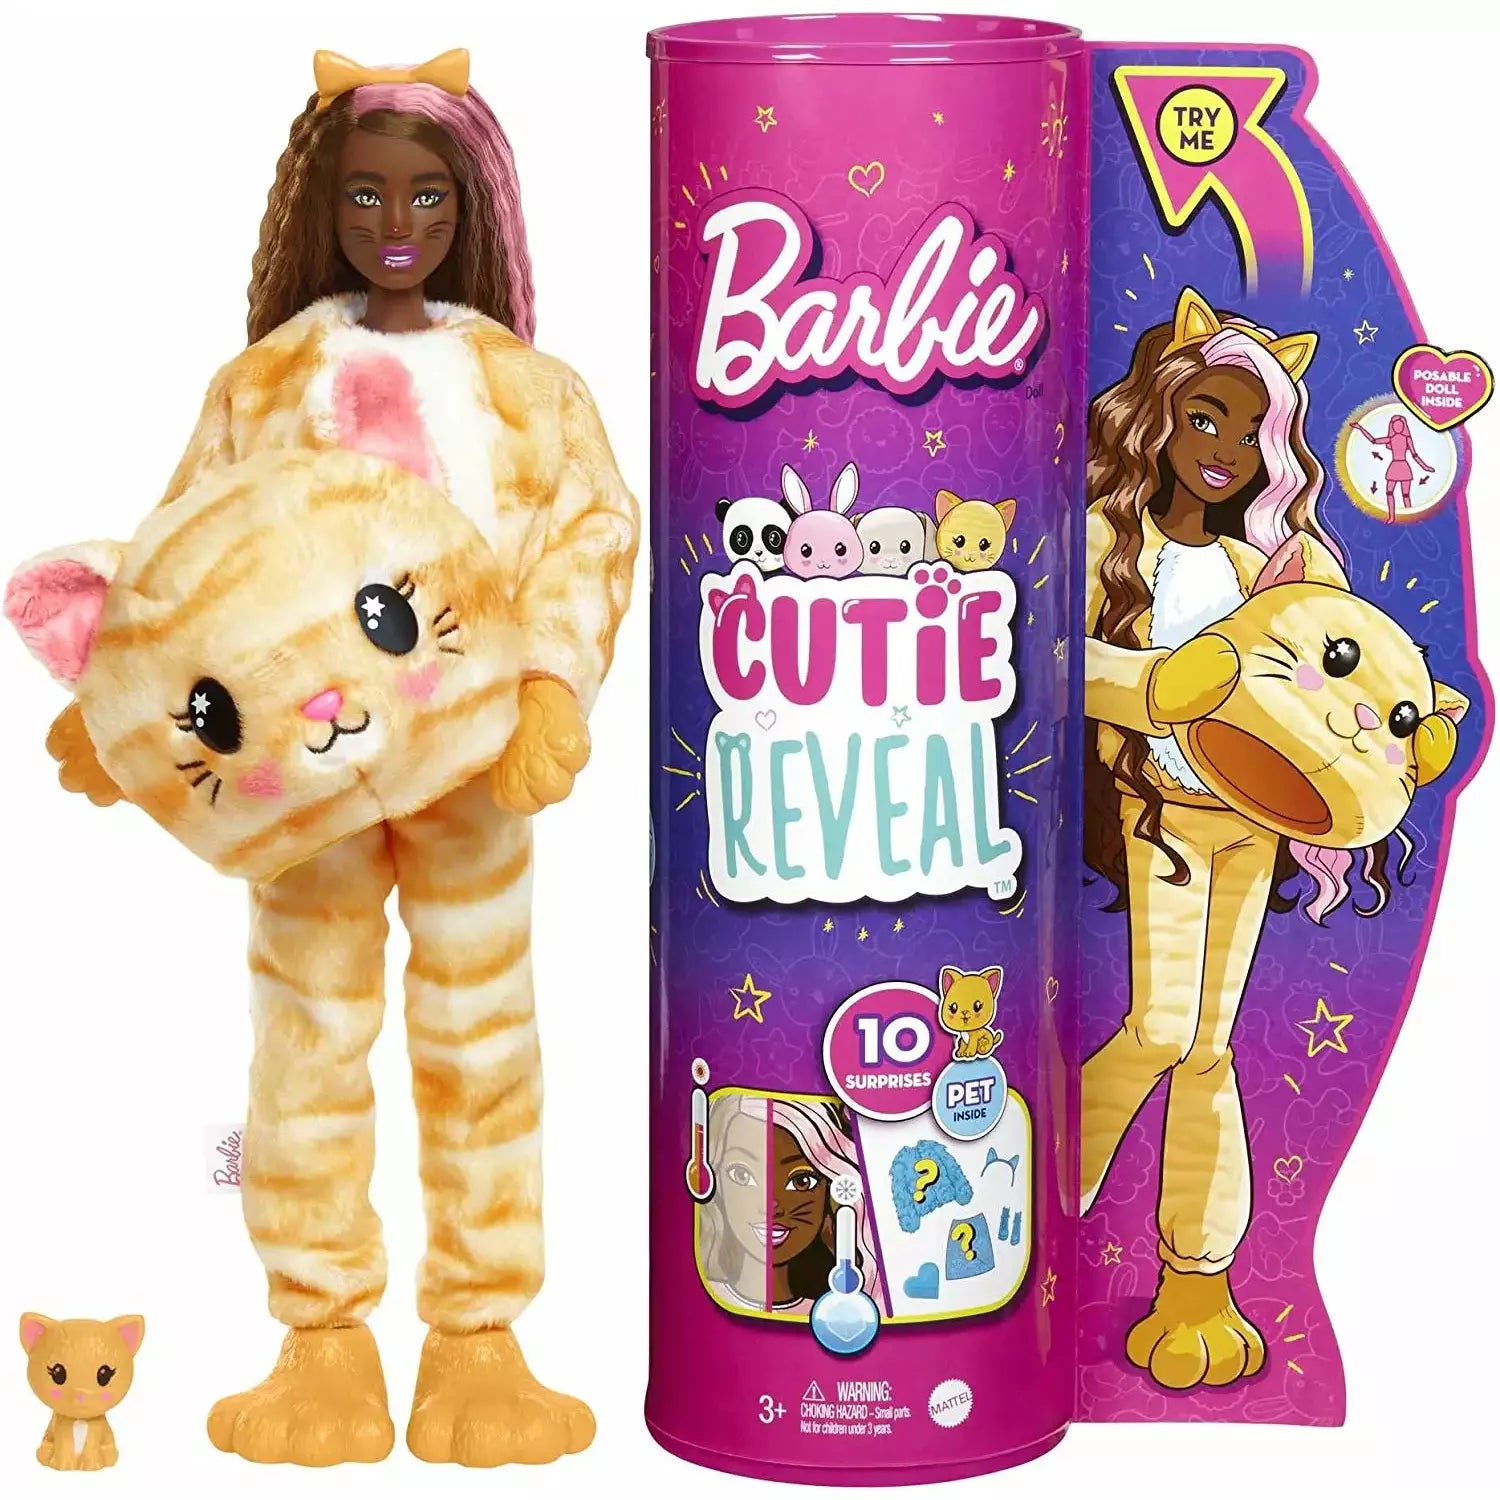 Barbie Cutie Reveal Doll With Kitty Plush Costume & 10 Surprises Including Mini Pet & Color Change - BumbleToys - 5-7 Years, Barbie, Fashion Dolls & Accessories, Girls, OXE, Pre-Order